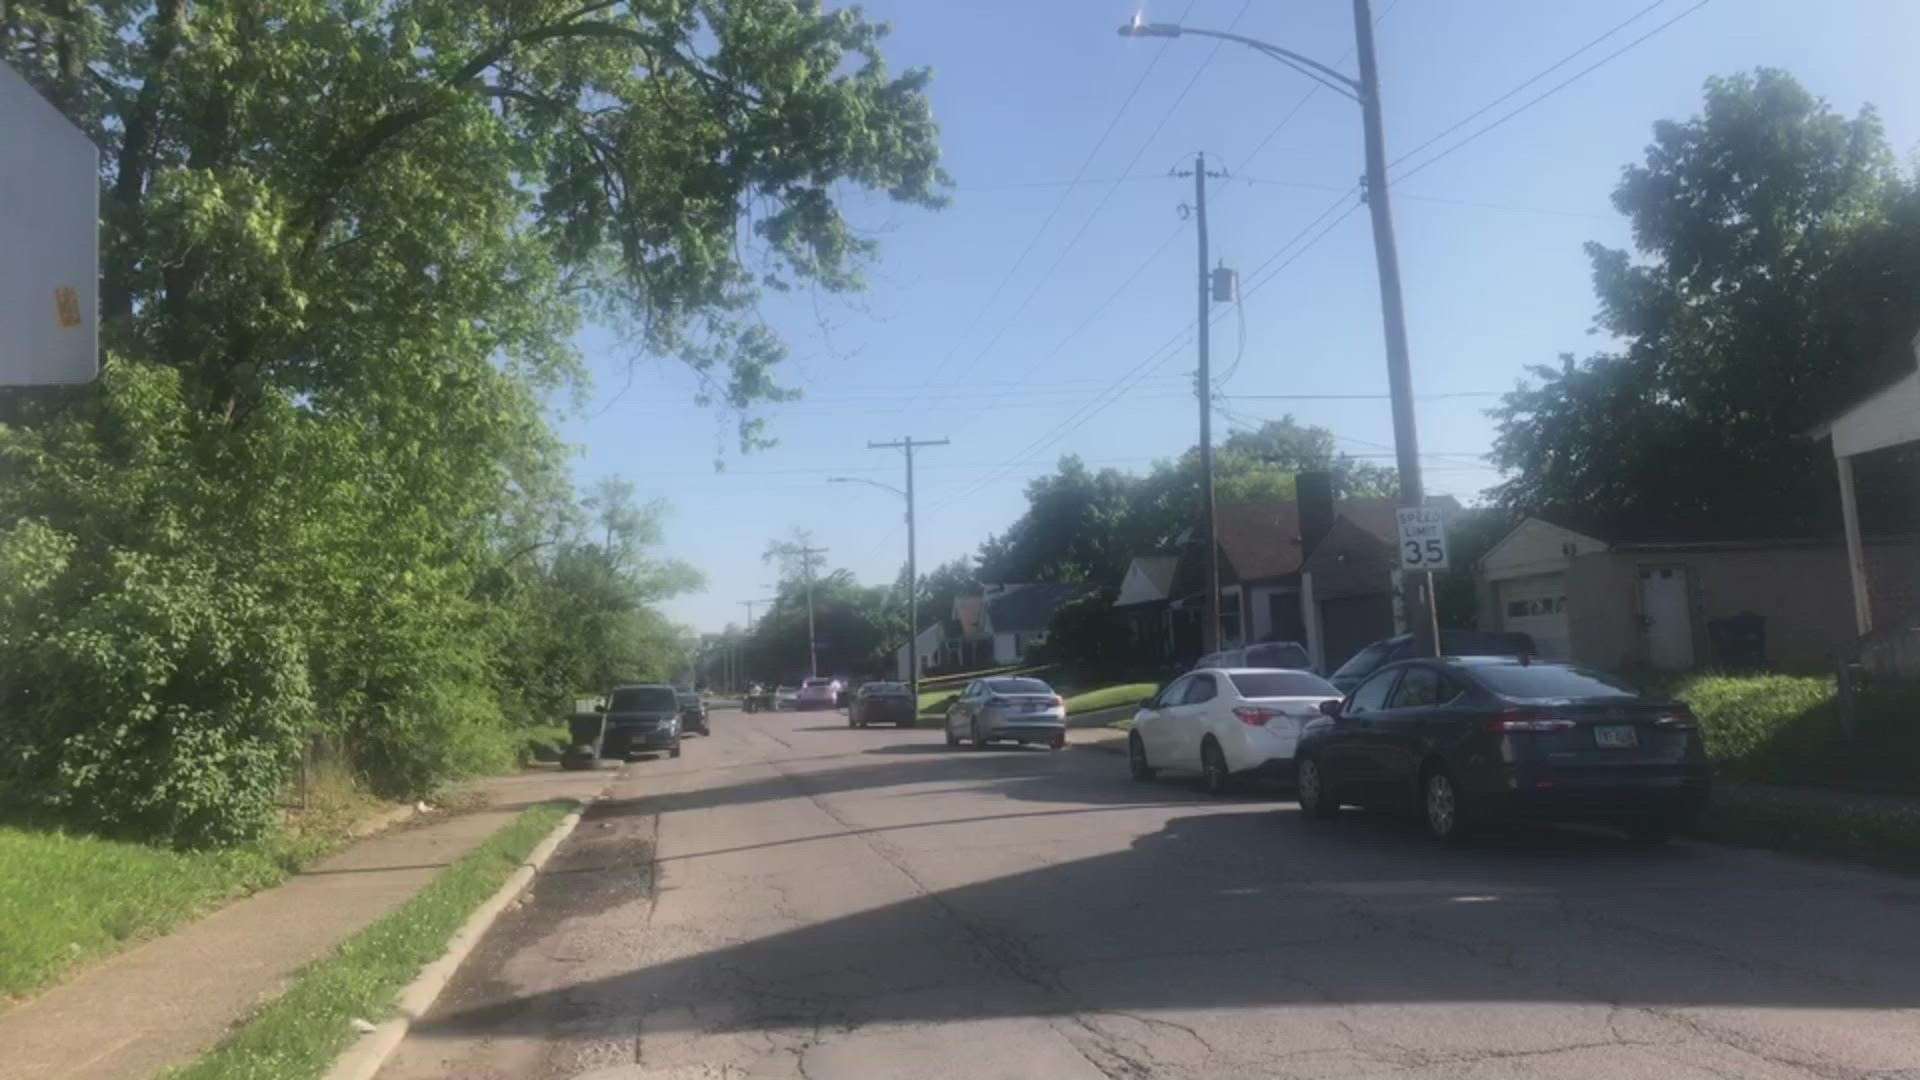 The shooting happened in the 2100 block of Hamilton Avenue, according to Columbus police.